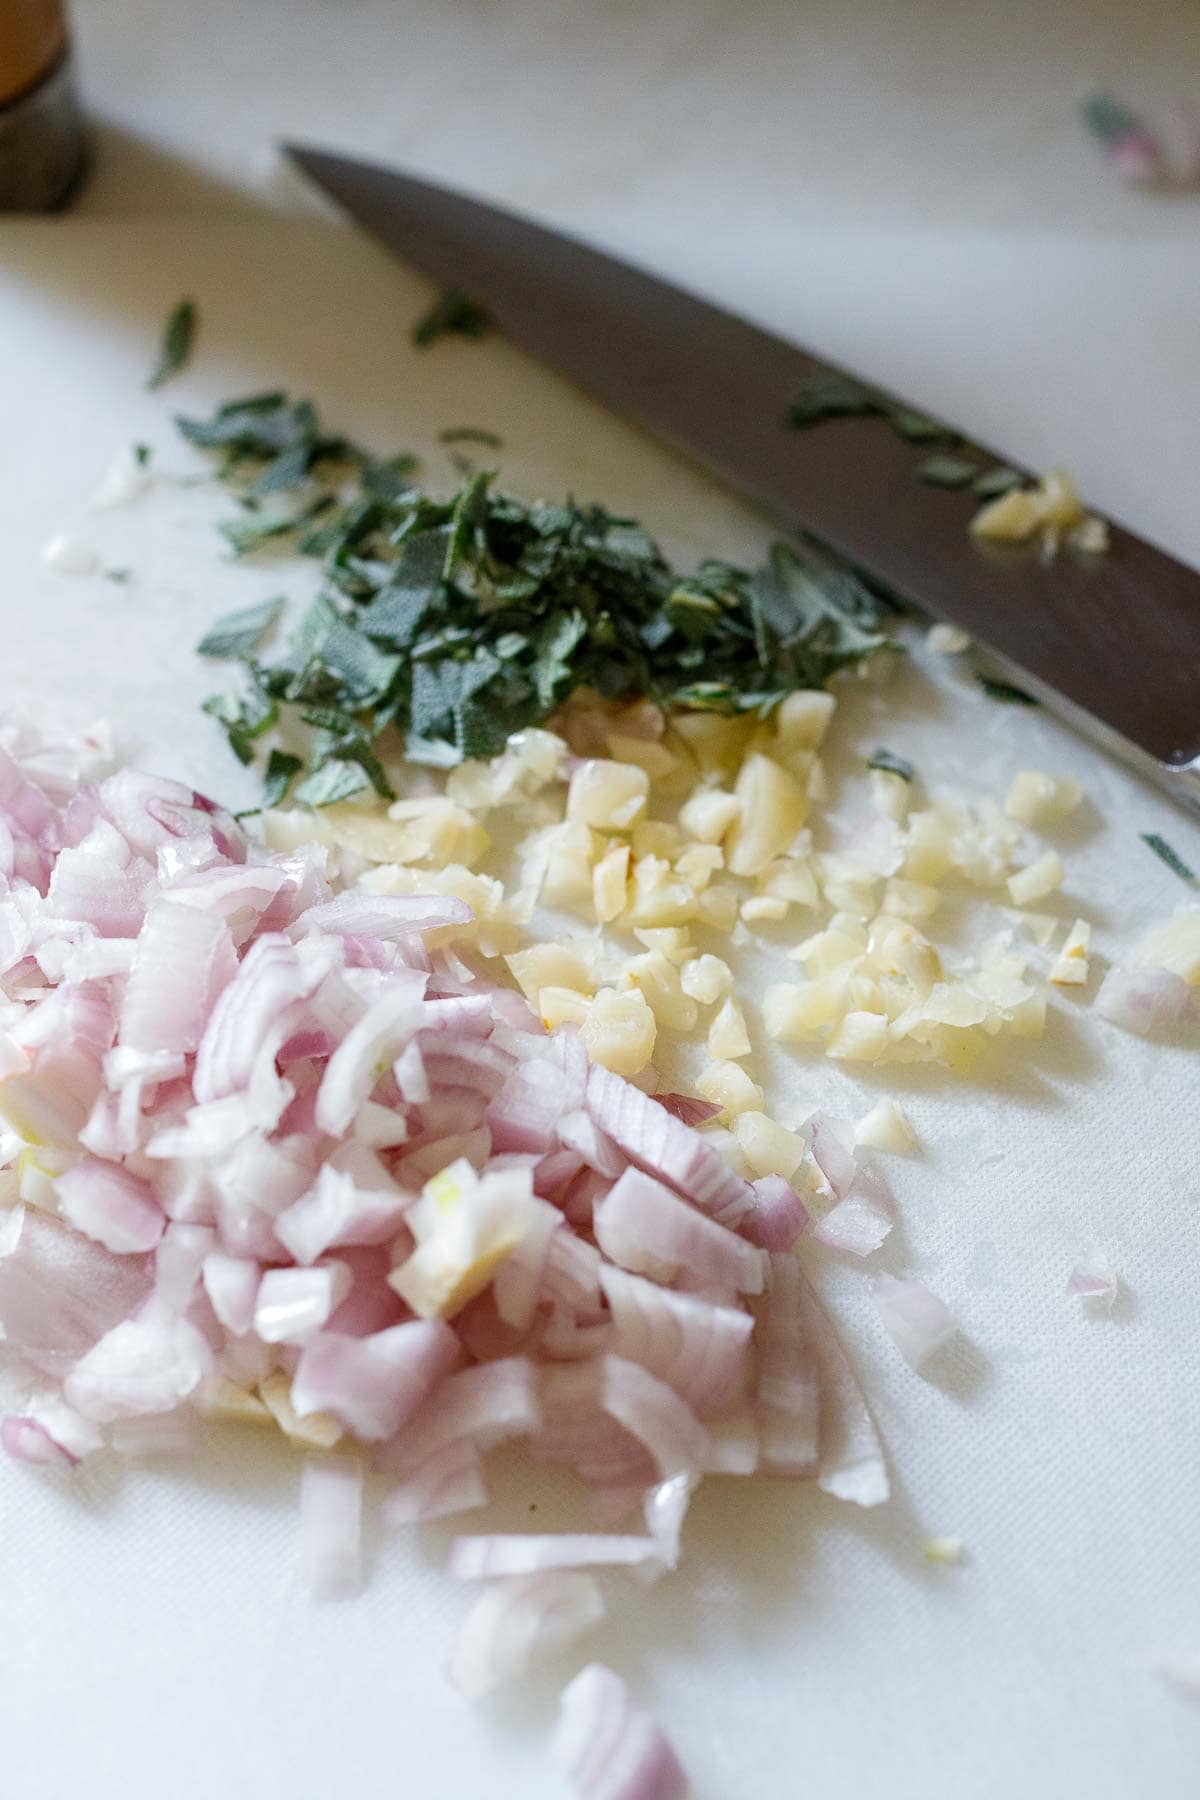 chopped shallot, garlic, and sage on cutting board with knife